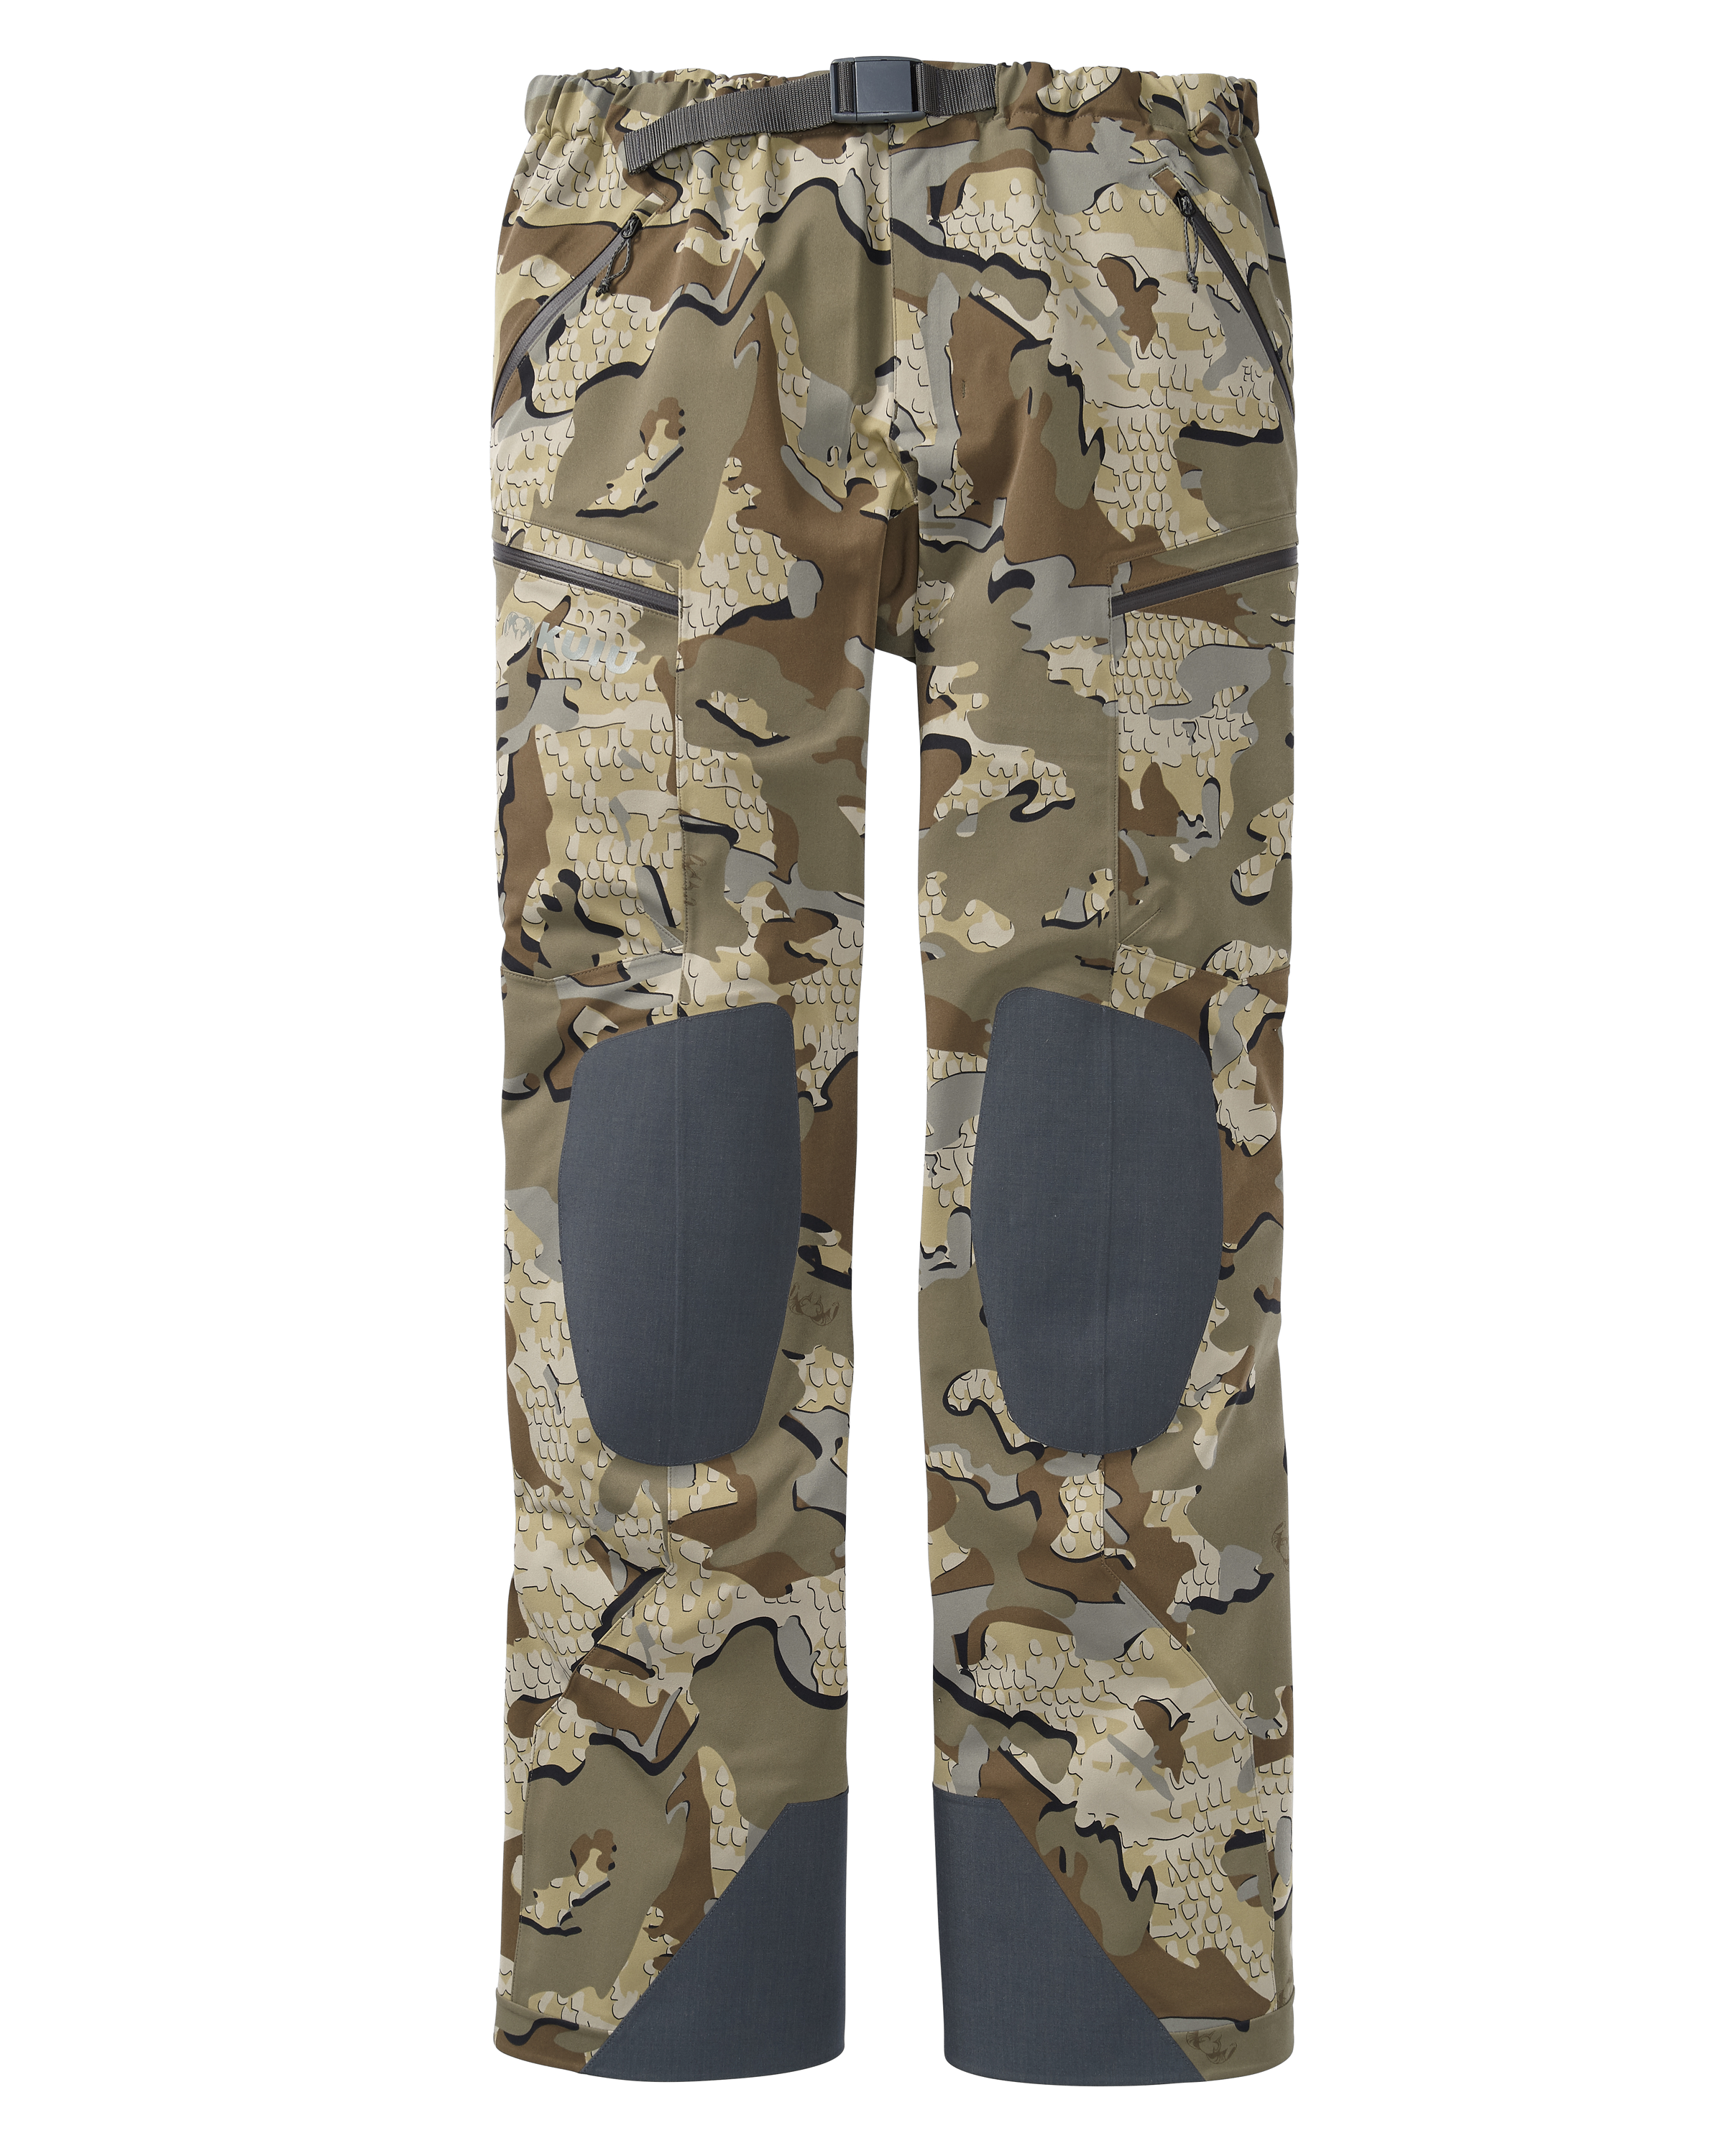 KUIU Outlet Yukon Rain Hunting Pant in Valo | Size Small